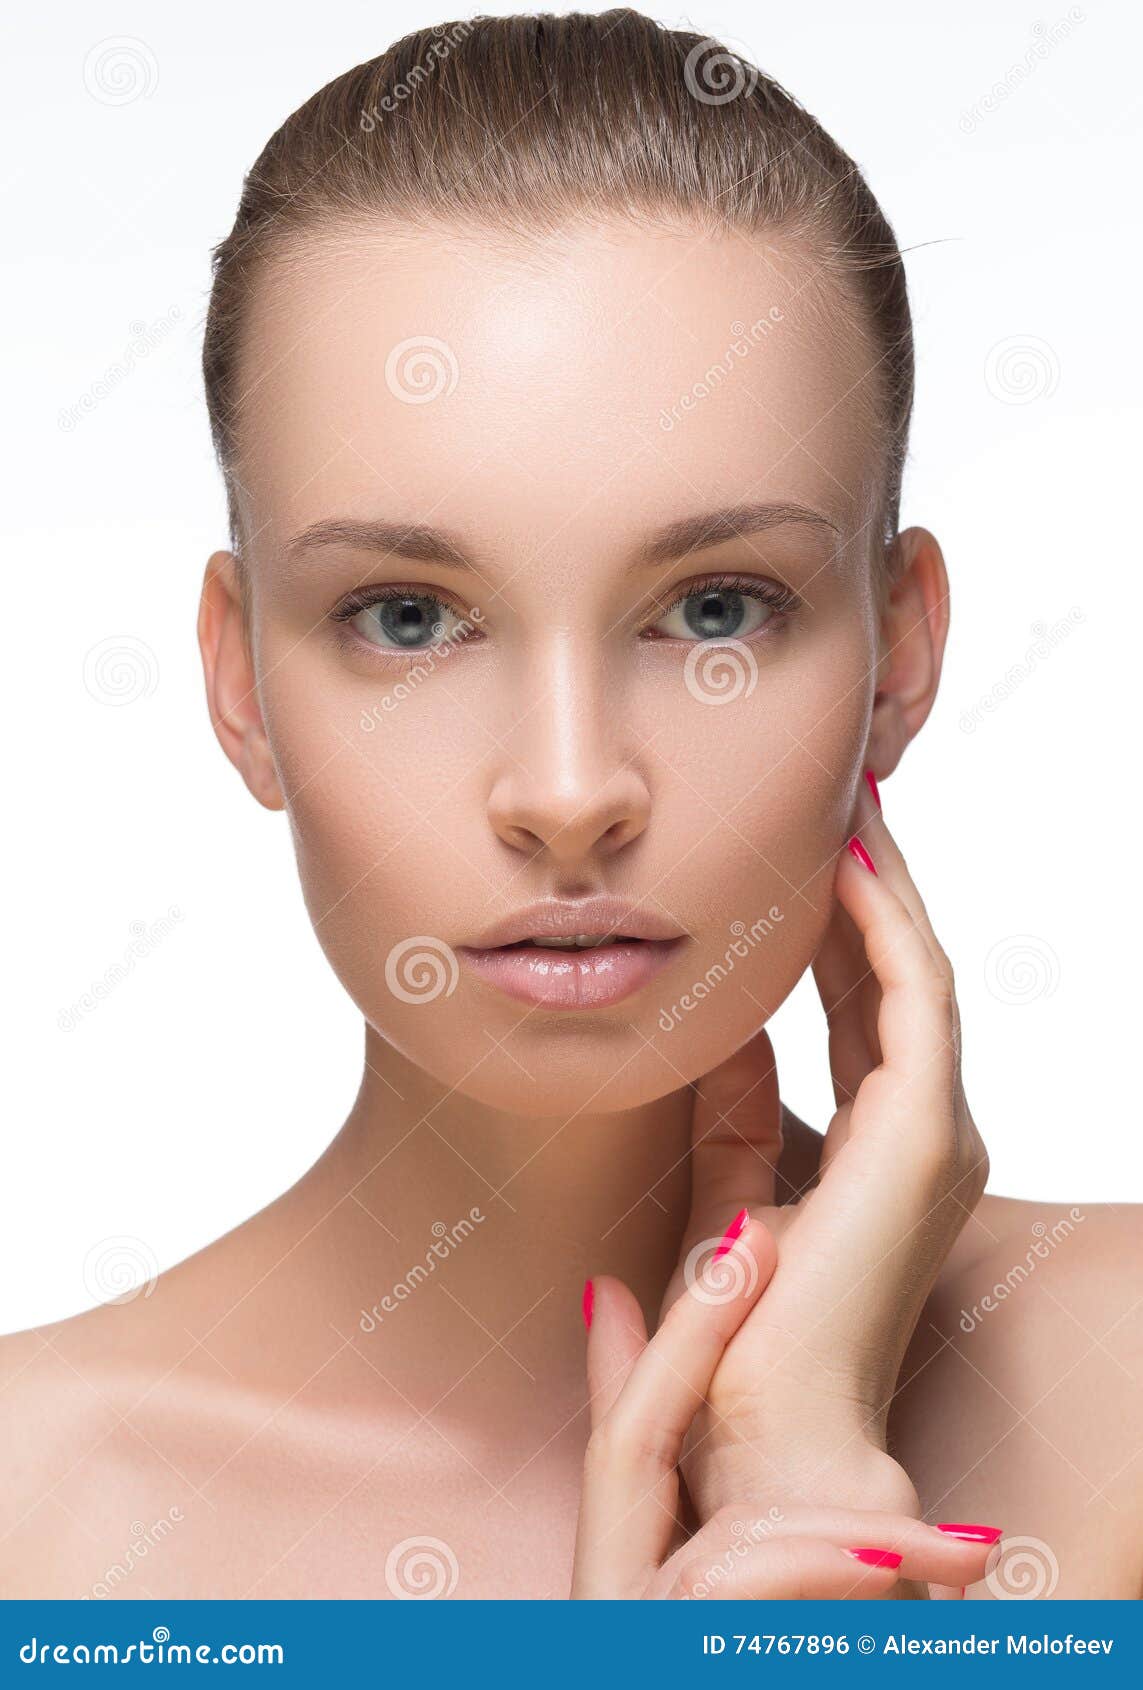 https://thumbs.dreamstime.com/z/beauty-woman-face-portrait-girl-perfect-fresh-clean-skin-female-looking-camera-smiling-youth-skin-care-concept-cheerfu-74767896.jpg